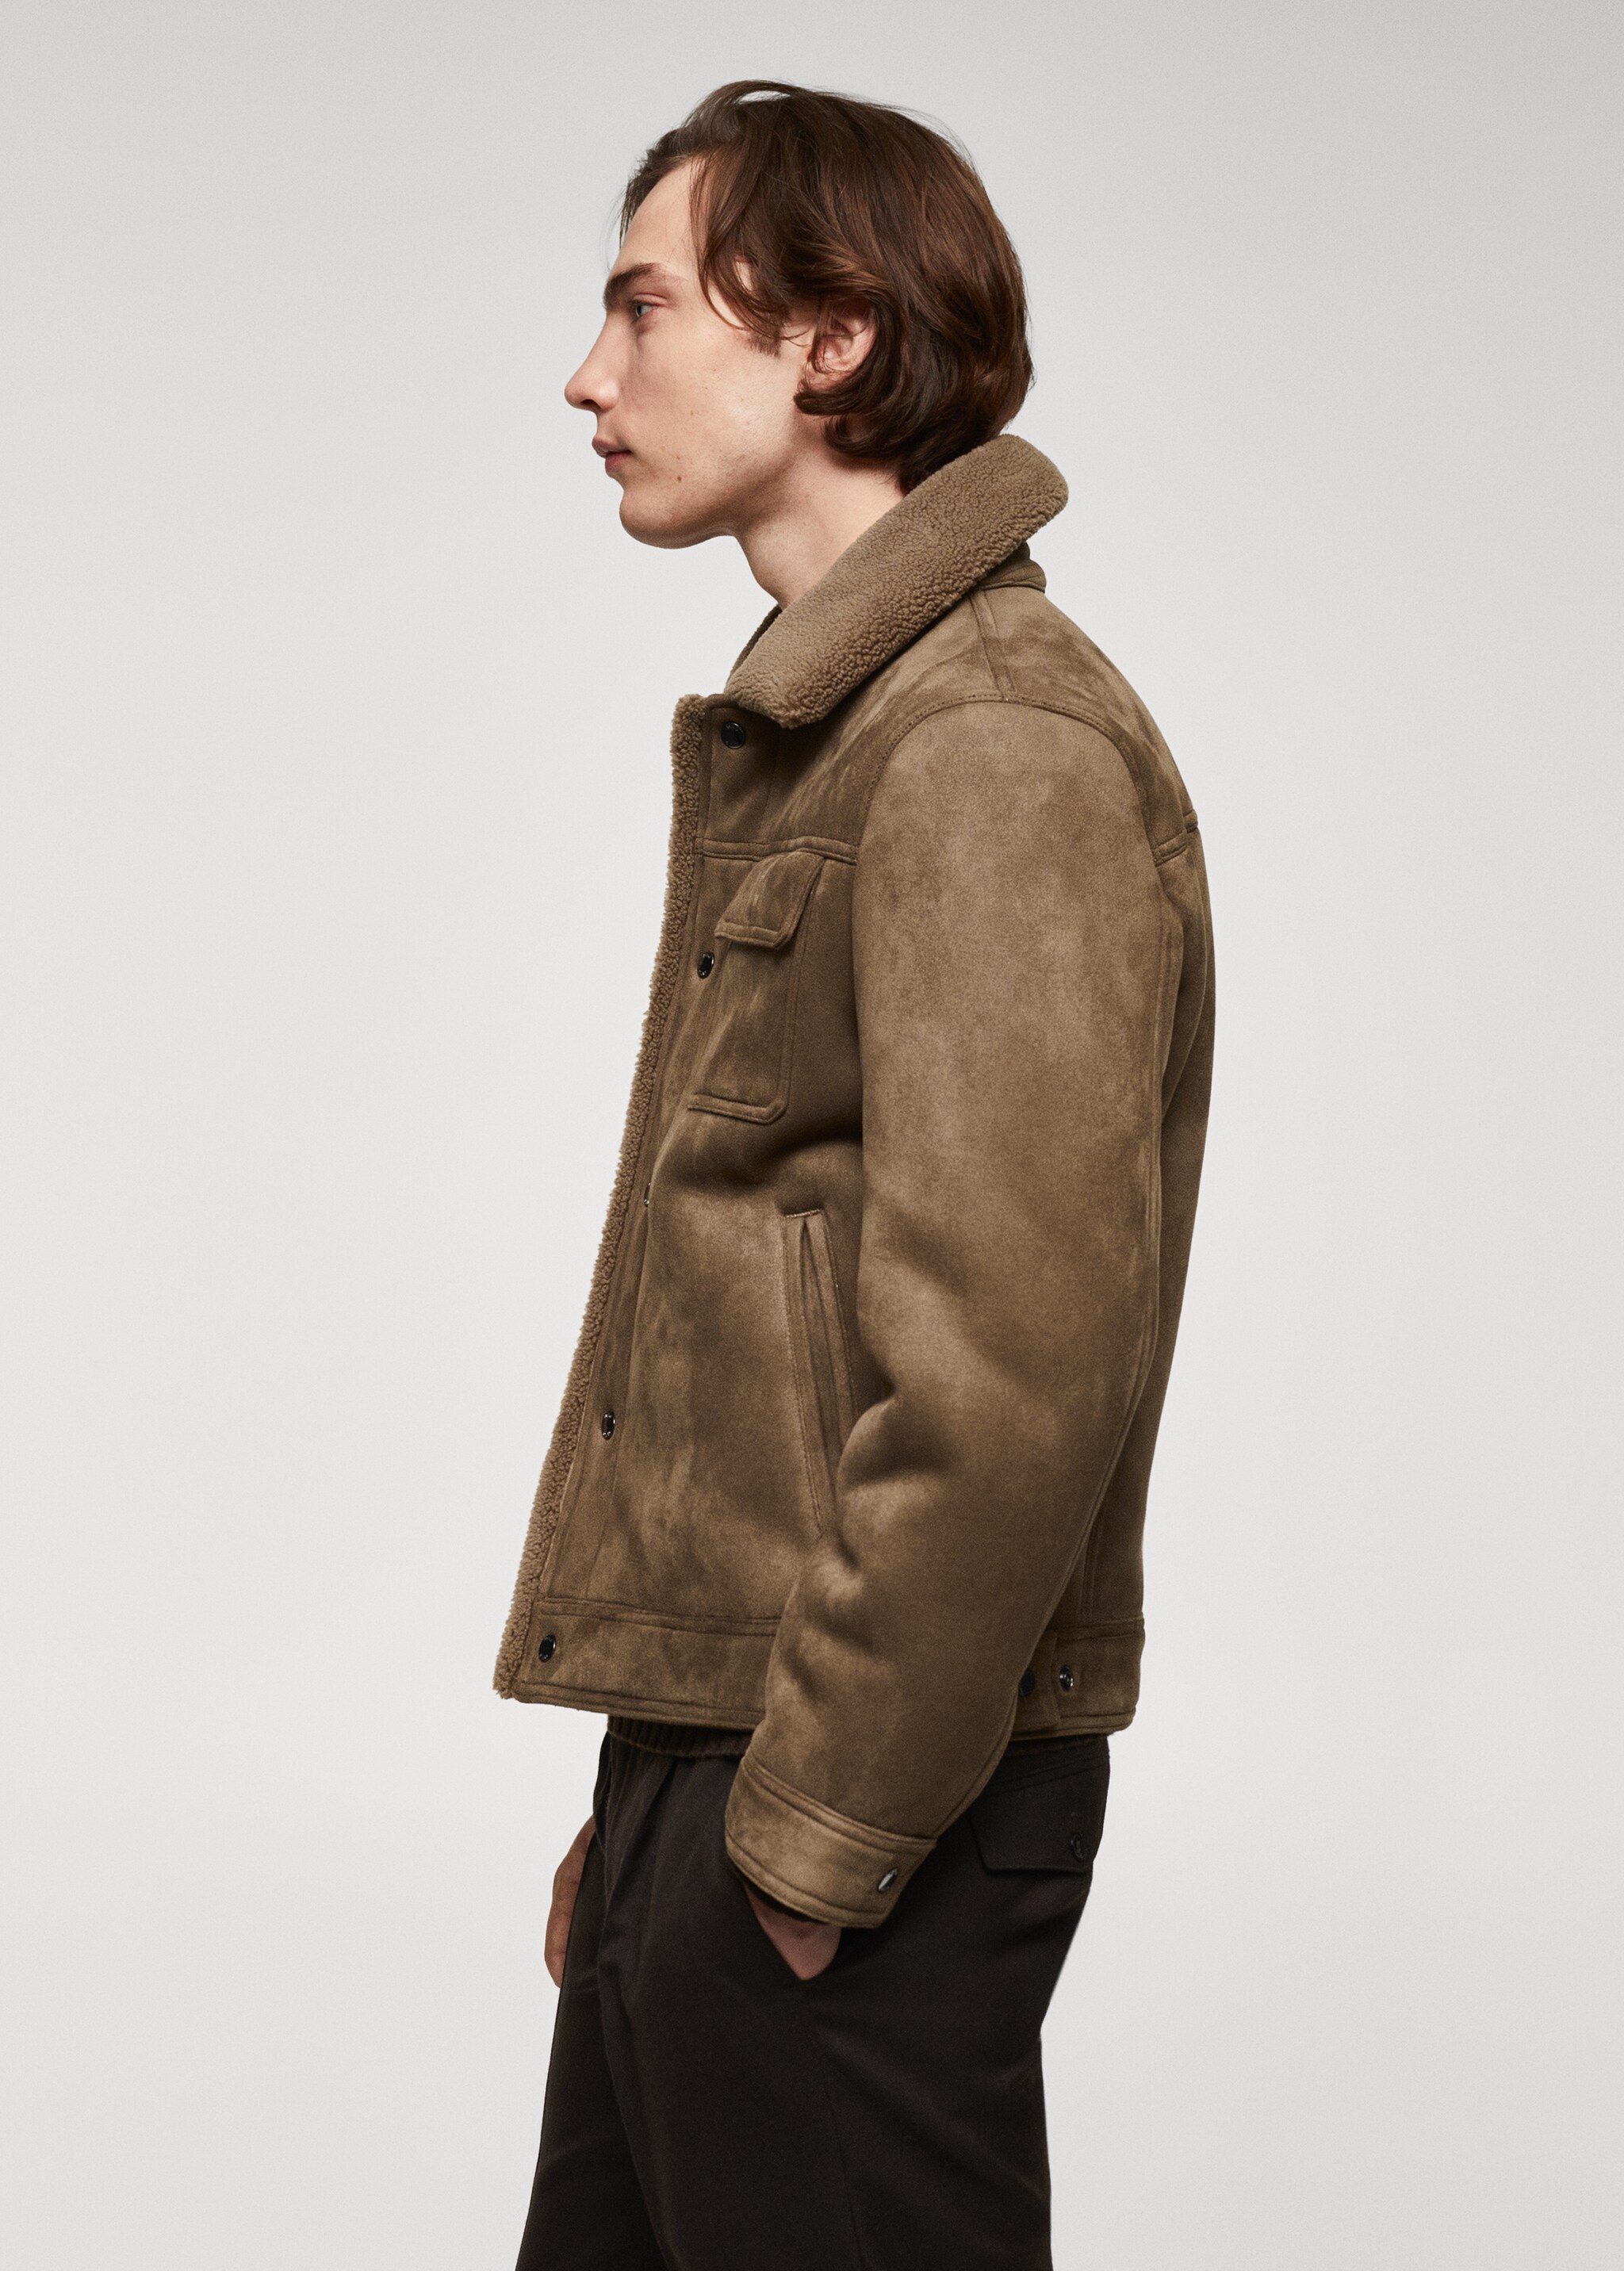 Shearling-lined jacket - Details of the article 2